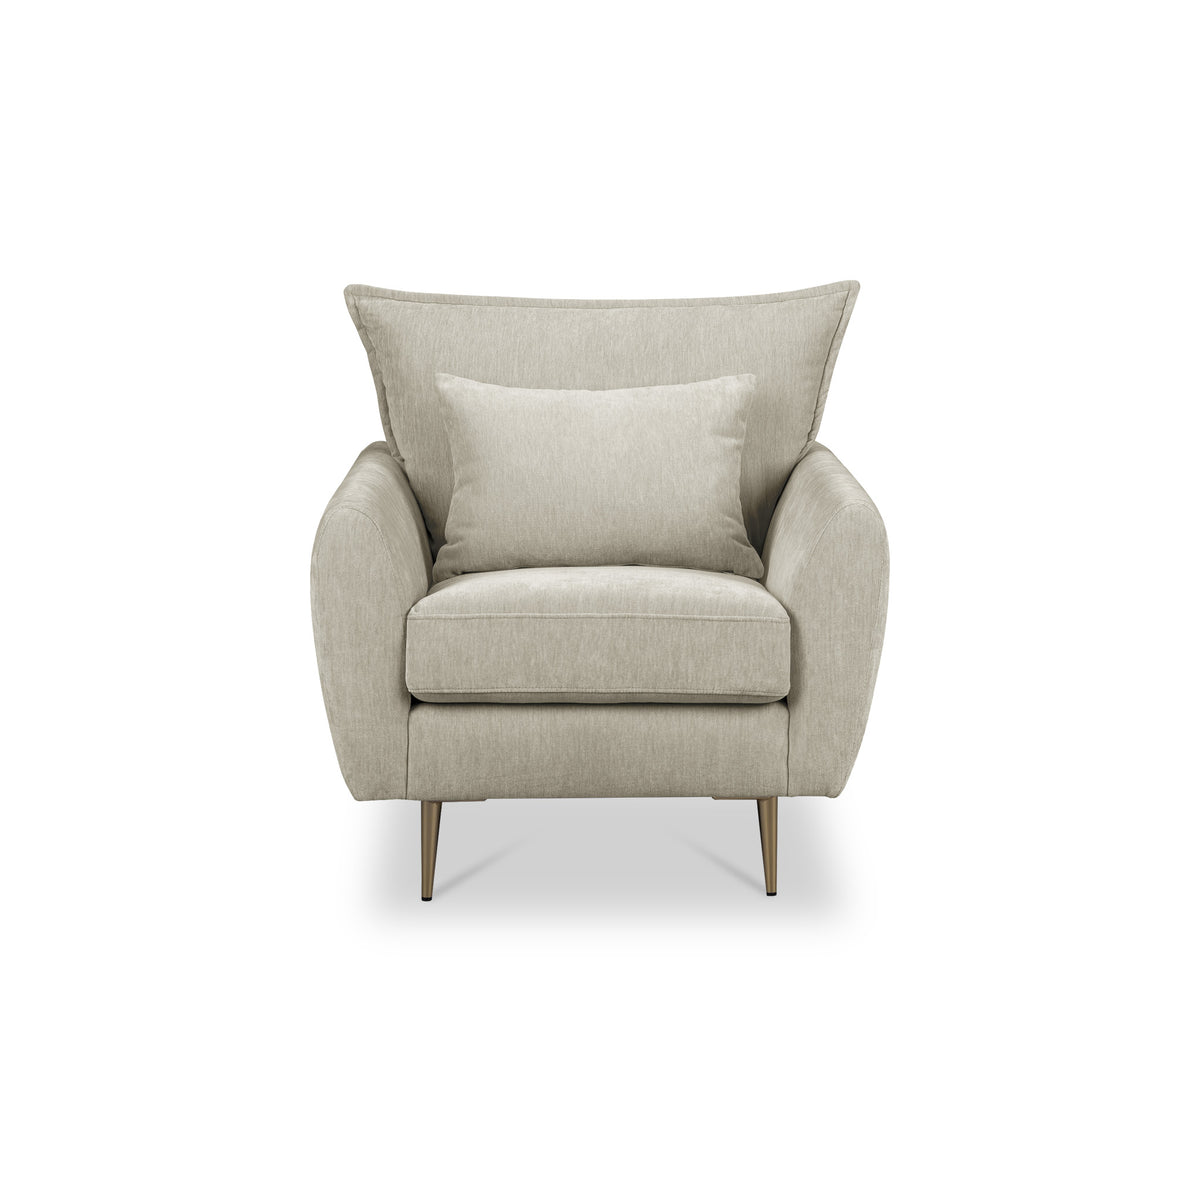 Evelyn Mink Armchair from Roseland Furniture